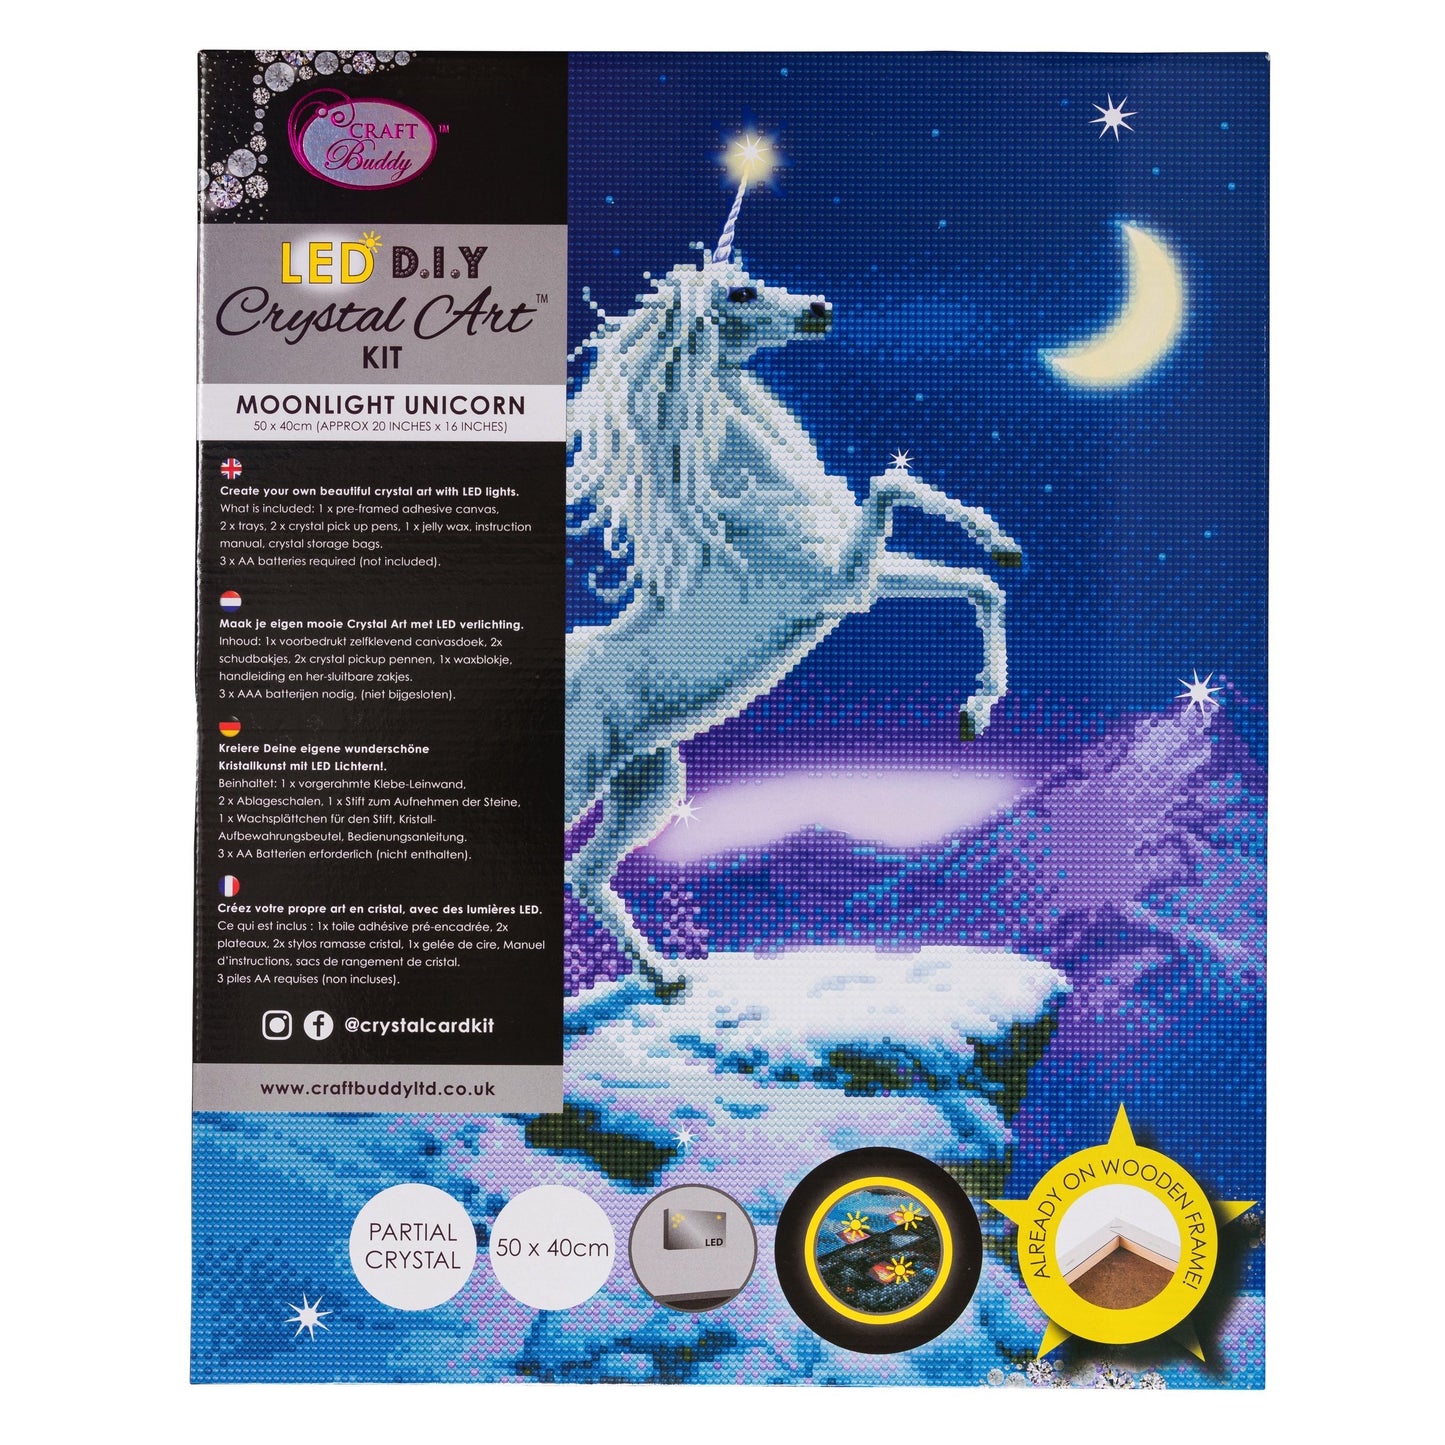 CAK-XLED14: "Moonlight Unicorn" Framed LED Crystal Art Kit - 40 x 50 (With Special Effects)